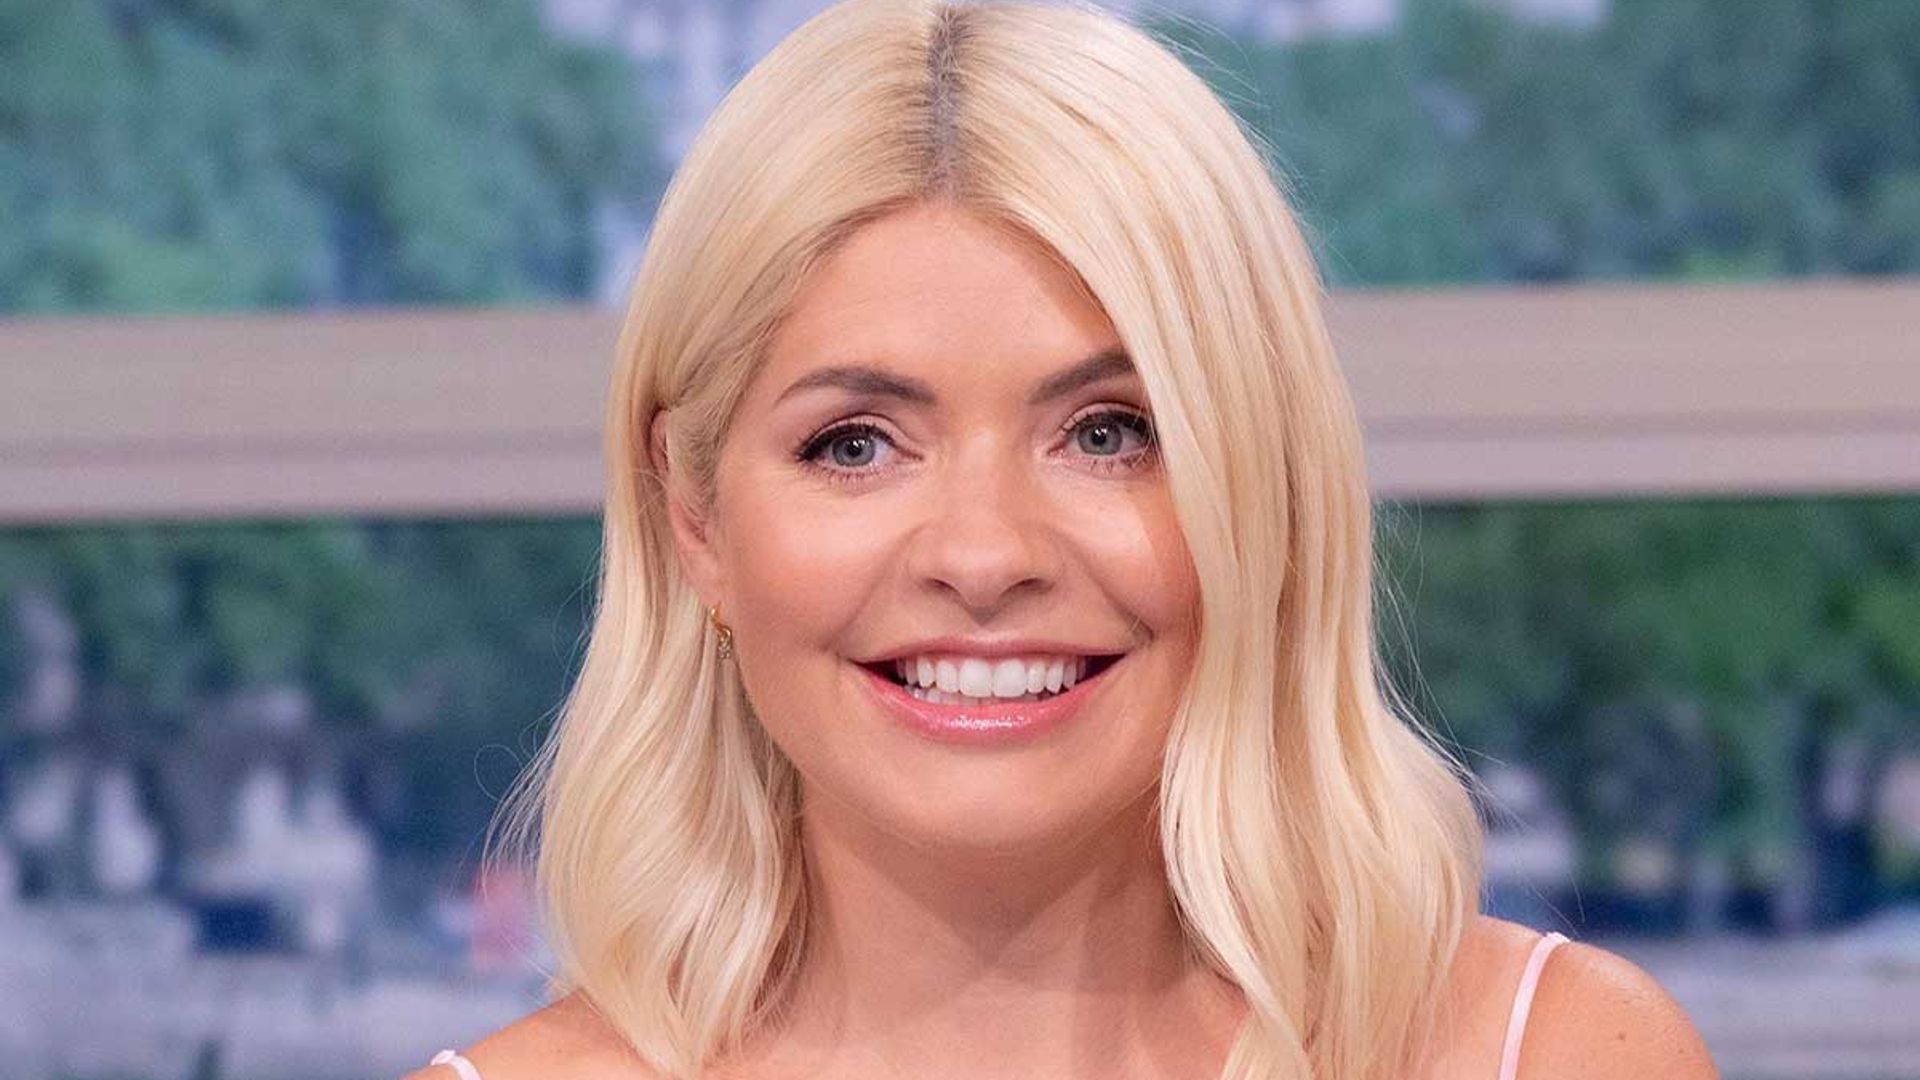 Holly Willoughby's sell-out M&S dress can be yours for £10